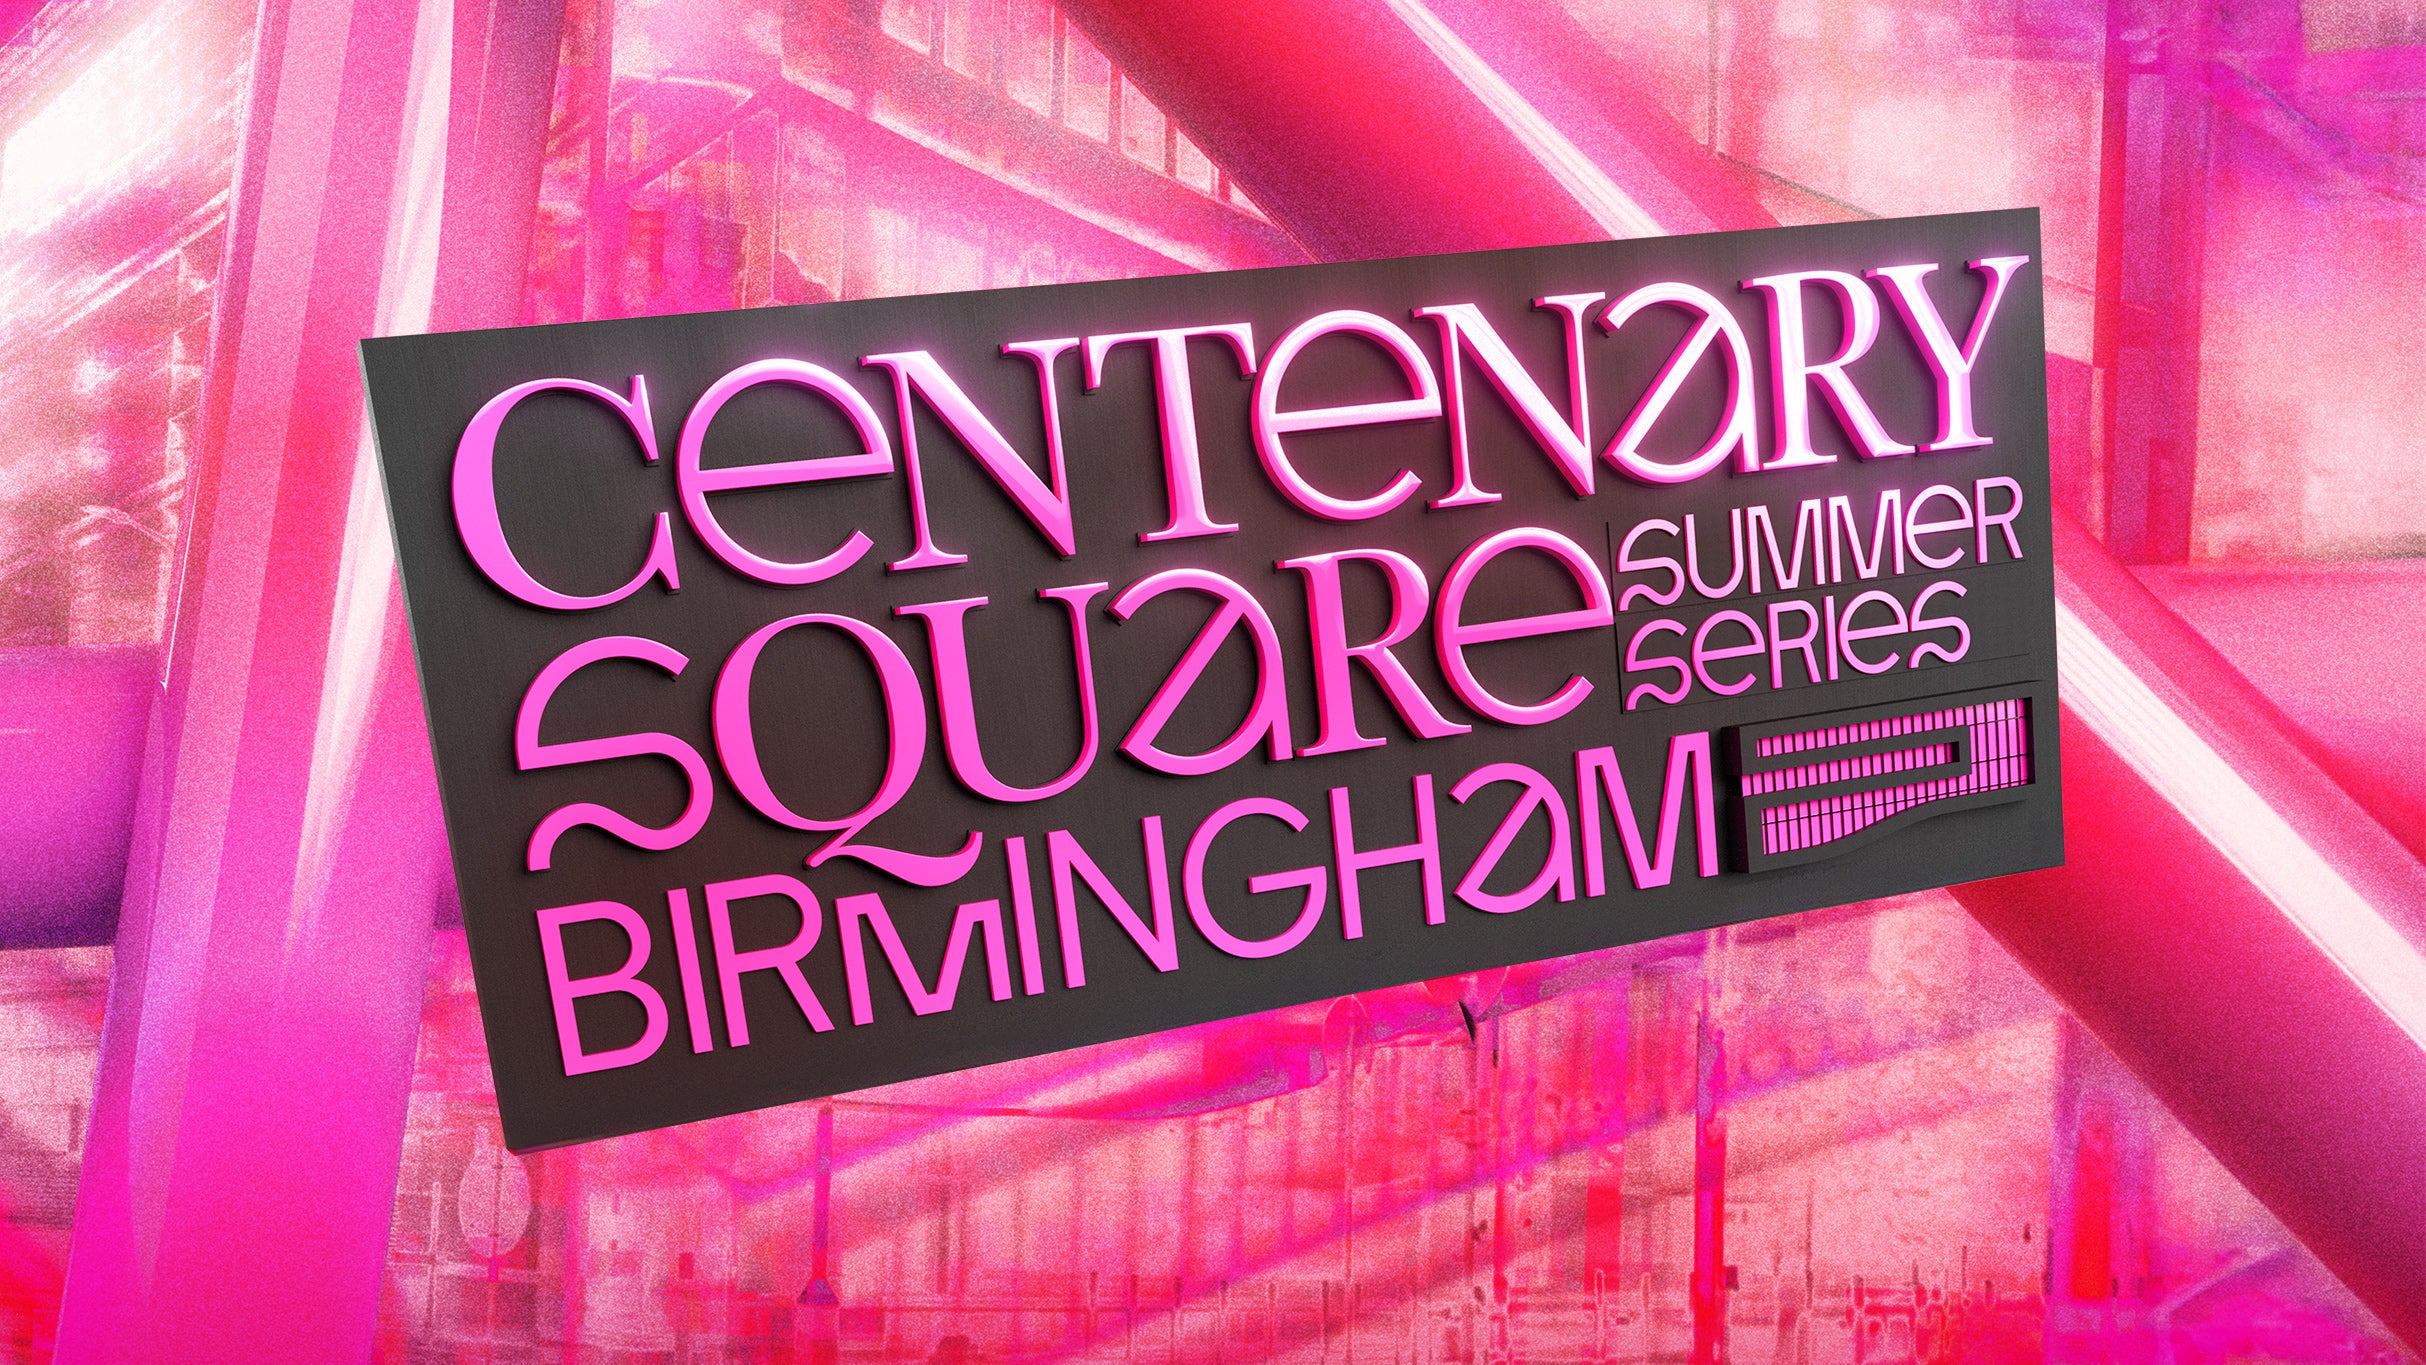 Centenary Square Summer Series: the Streets presale code for legit tickets in Birmingham